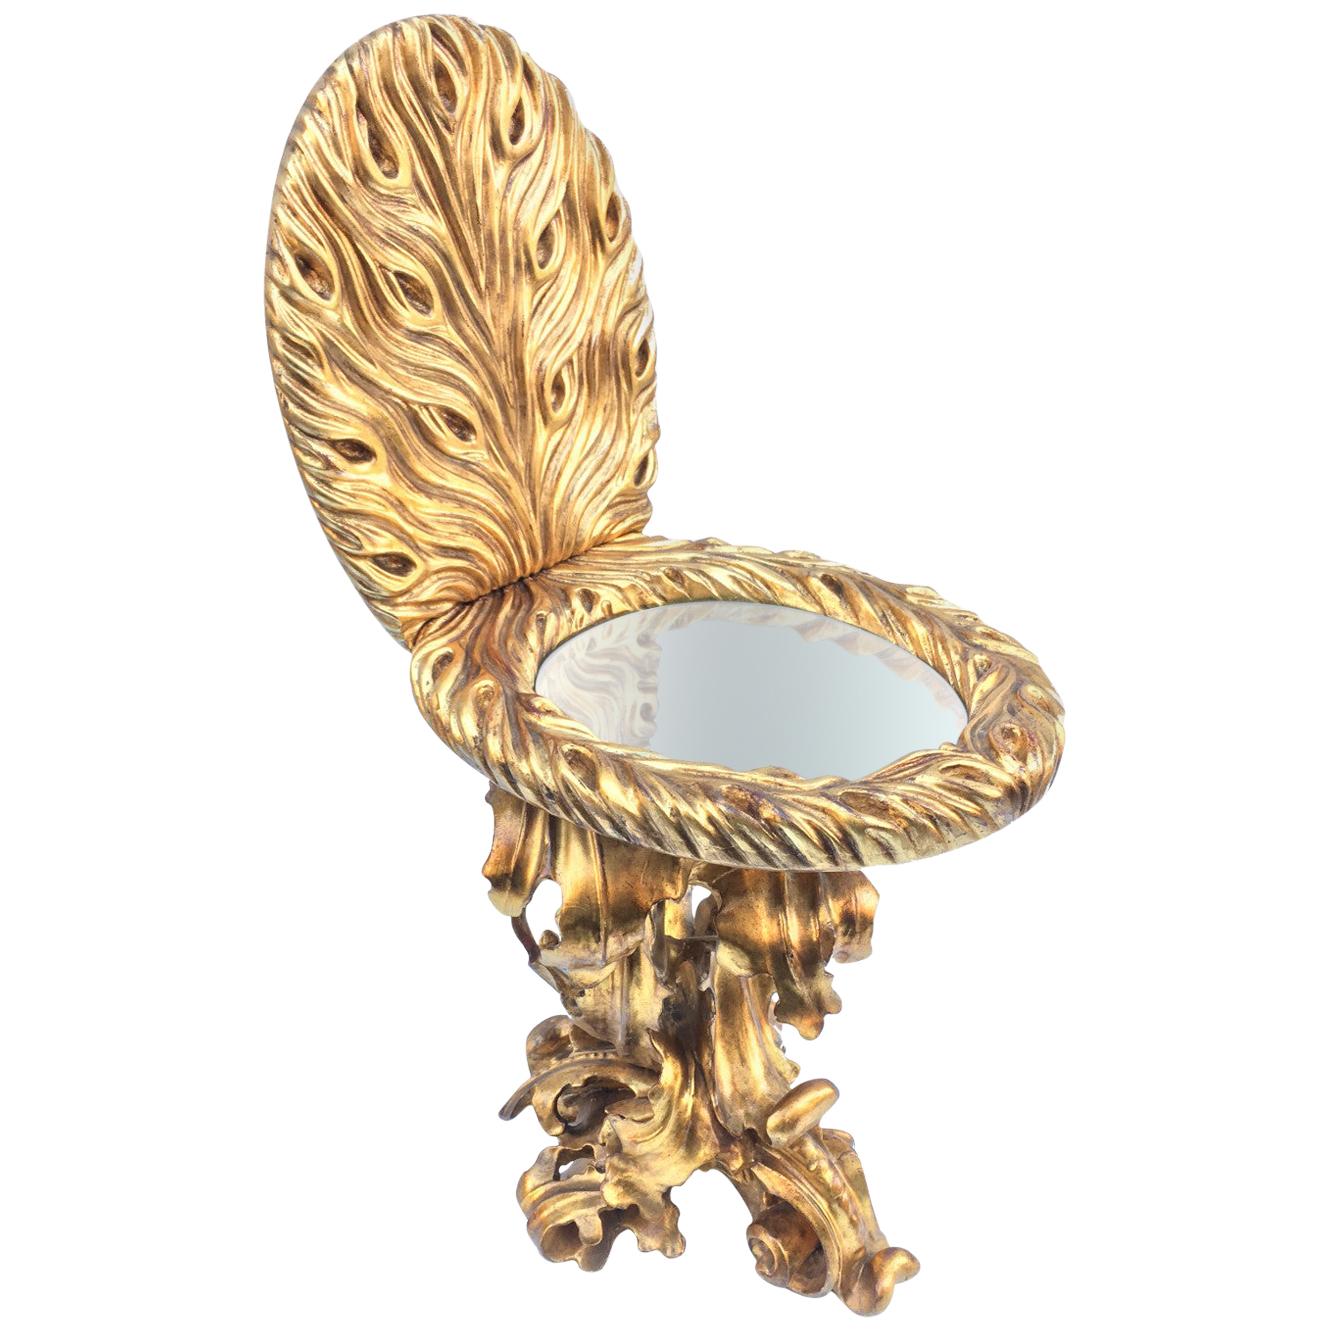 Contemporary Giltwood Toilet Shaped Sculptural Side Table With Mirror Top For Sale